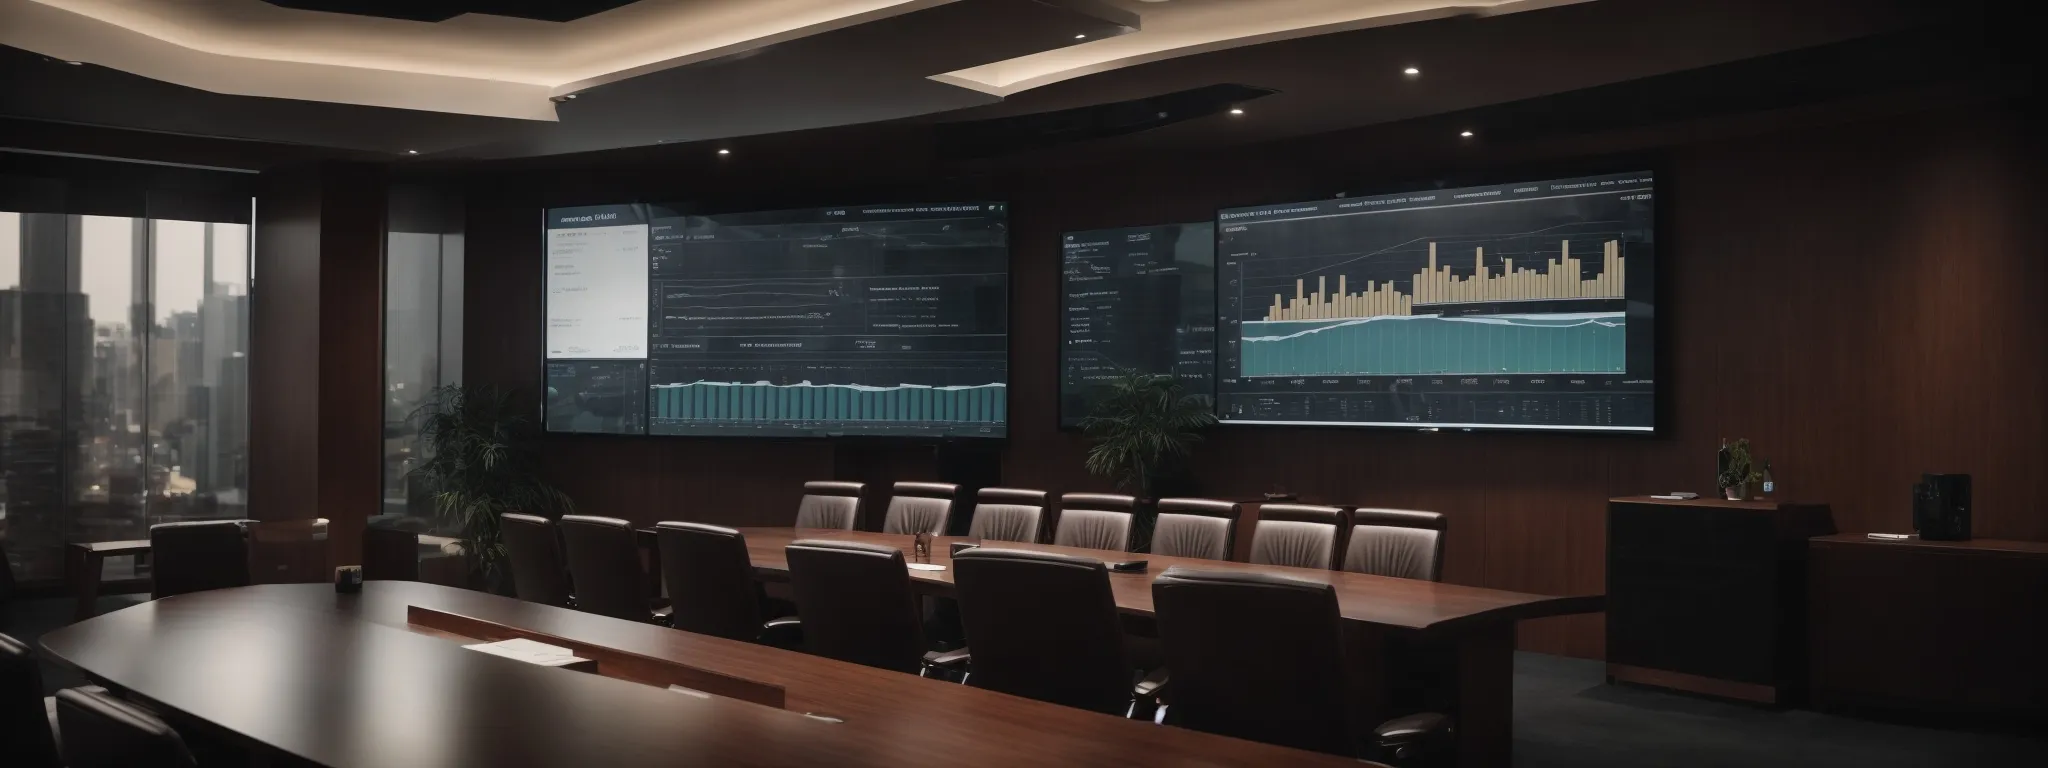 a professional meeting room with a large screen displaying analytics graphs.